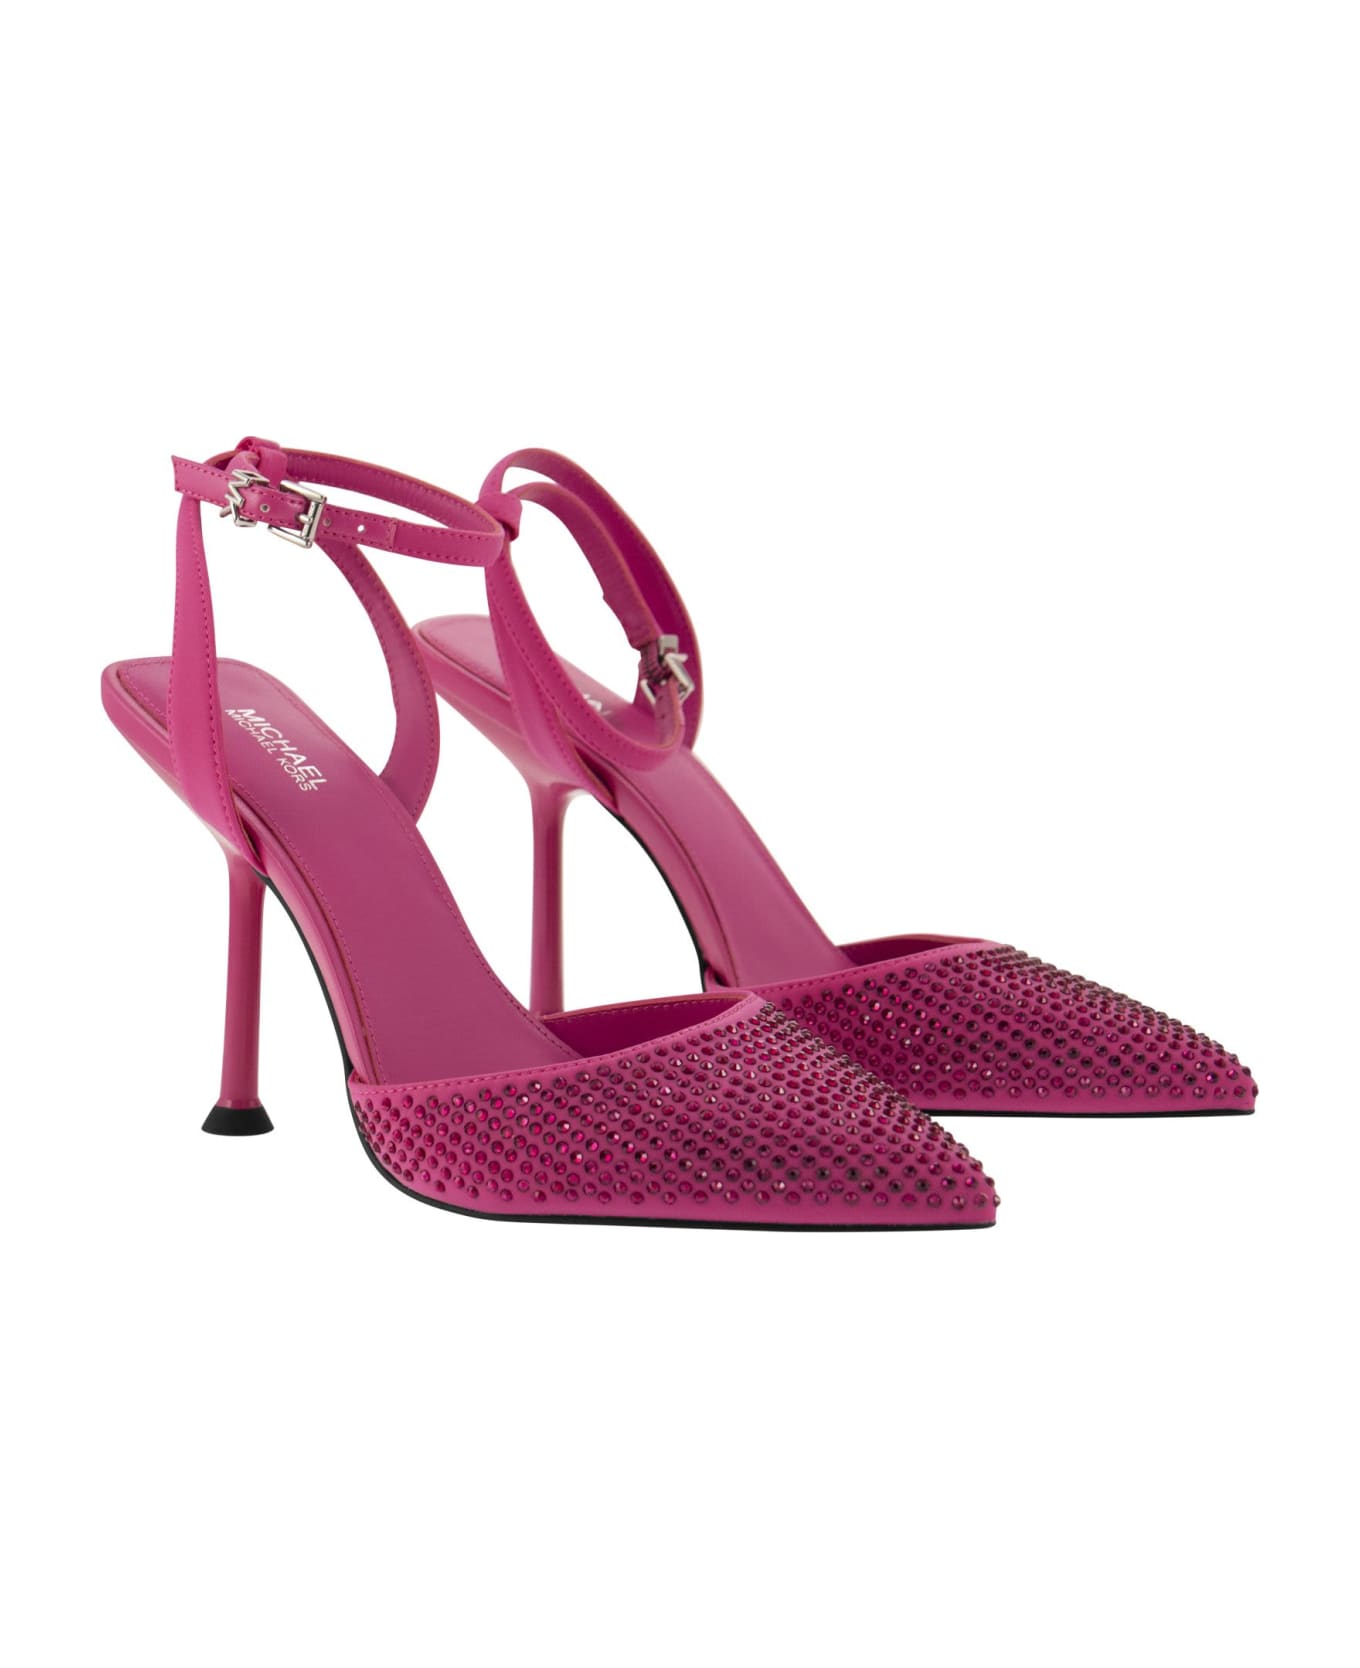 MICHAEL Michael Kors Imani Pump Pumps In Fabric With Crystals - Fuchsia